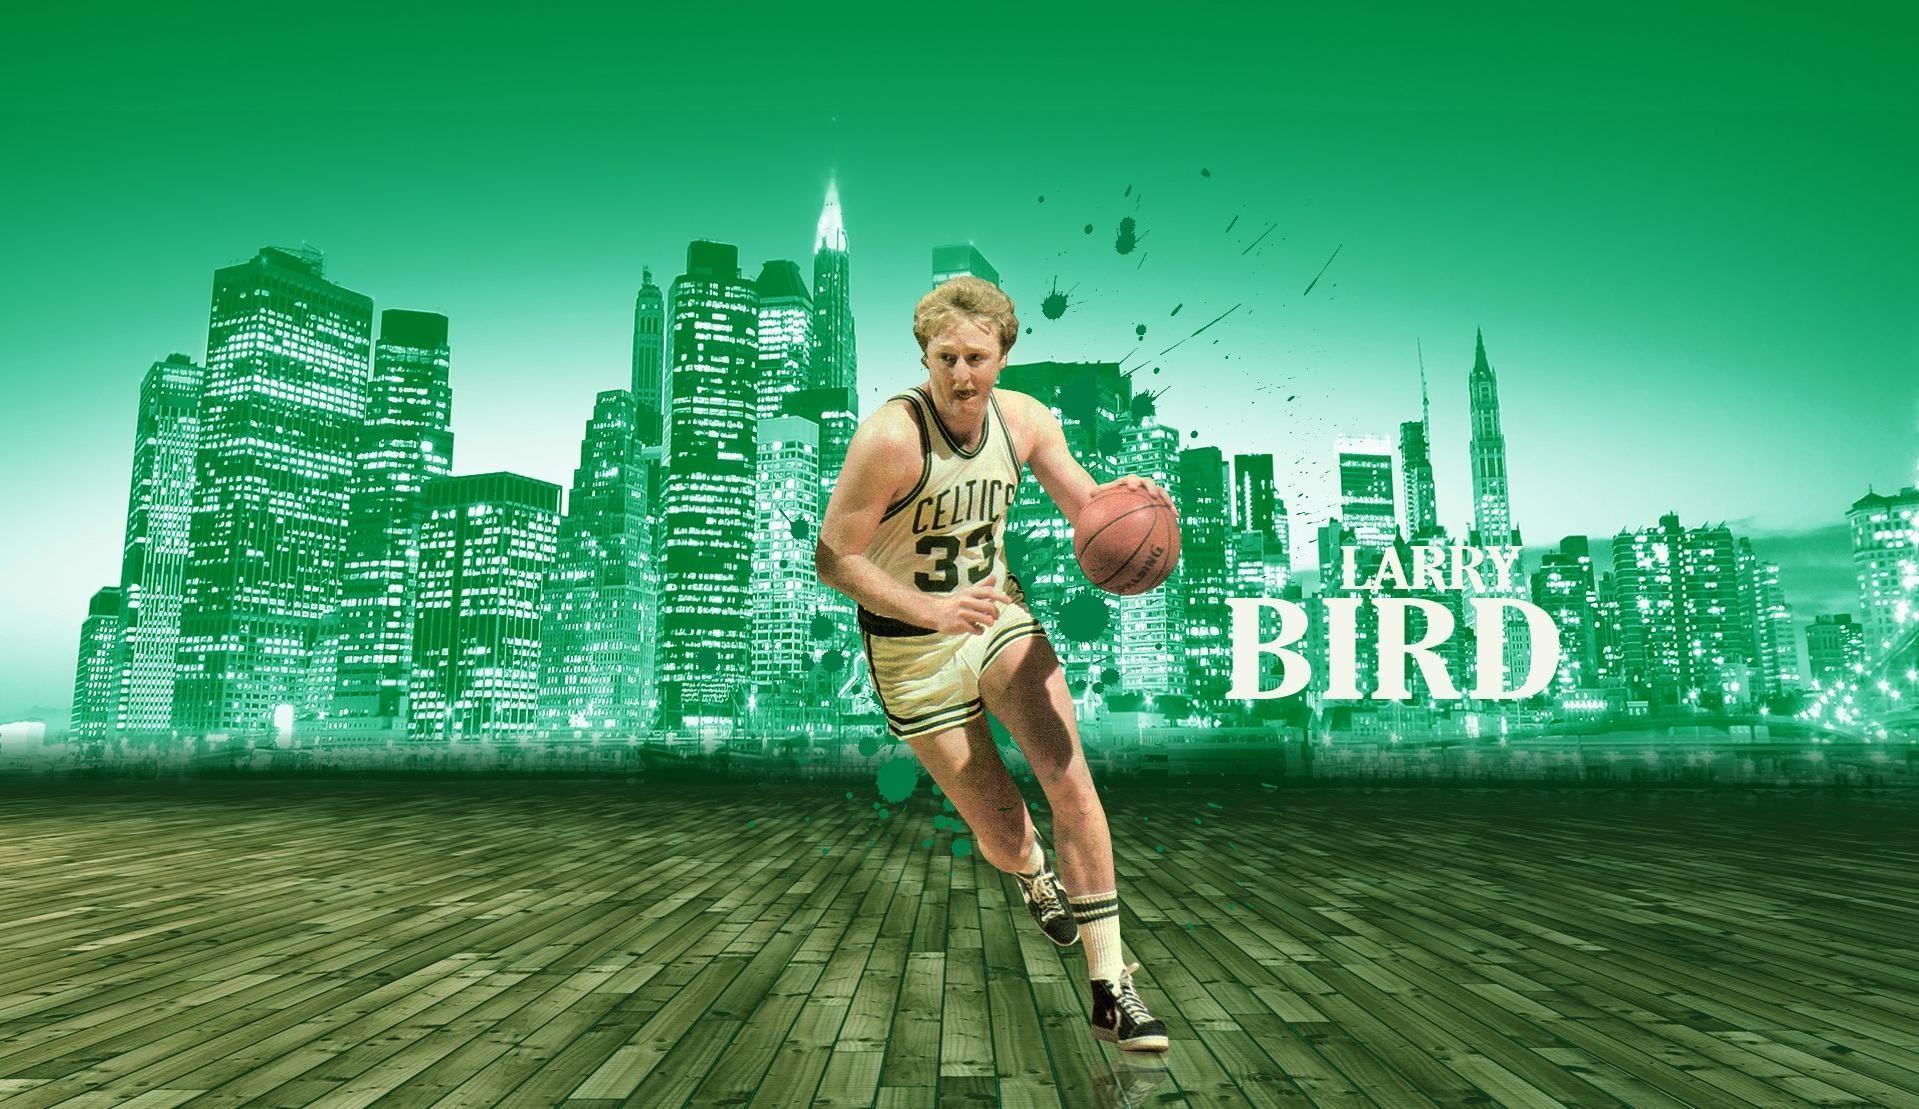 Larry Bird Wallpaper High Resolution and Quality Download